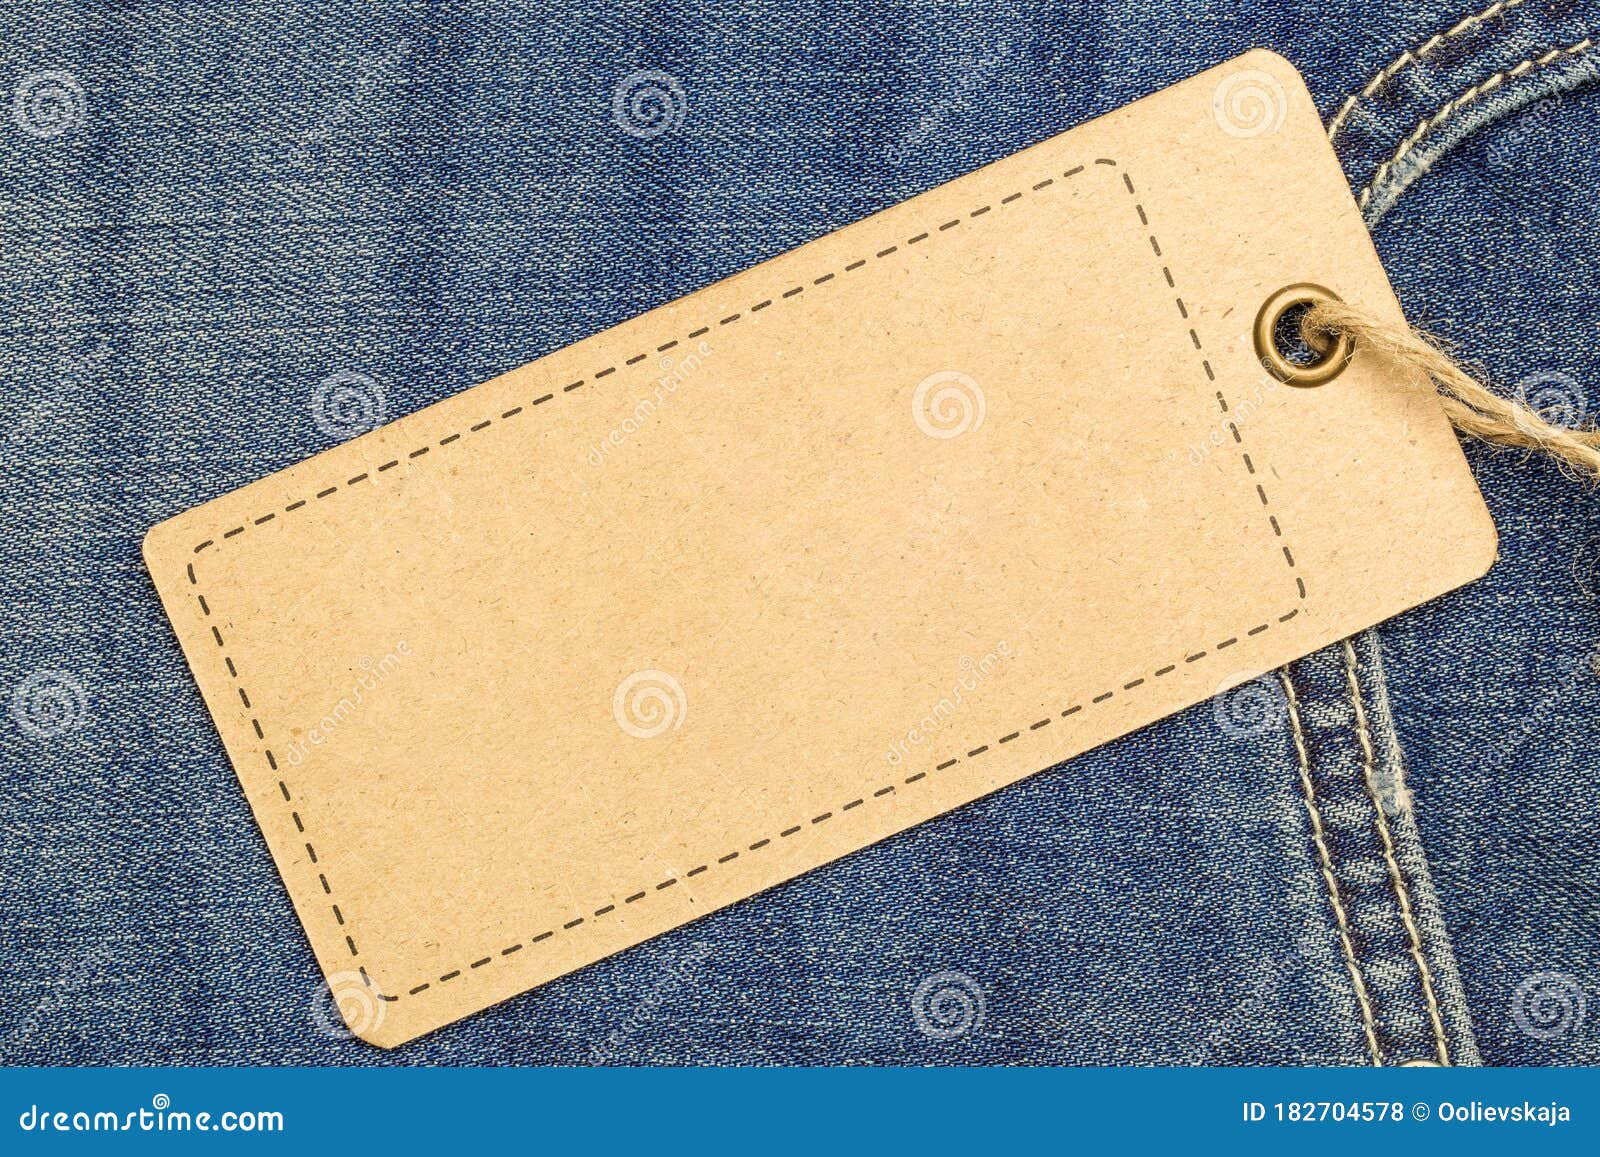 Download Label Price Tag Mockup On Blue Jeans From Recycled Paper. Stock Photo - Image of business, label ...